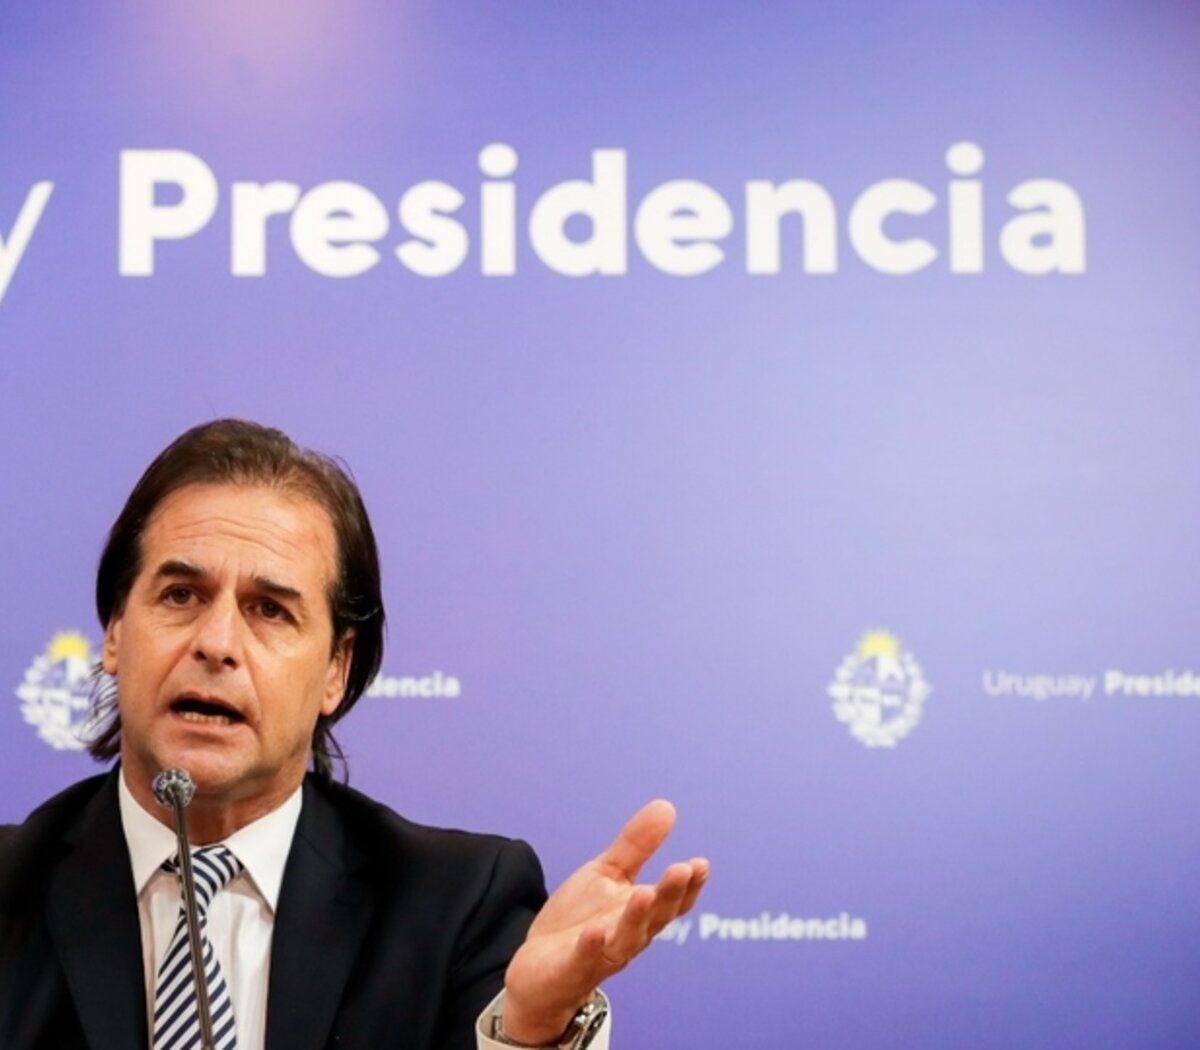 Uruguay's Lacalle gets highest approval ratings in LatAm — MercoPress